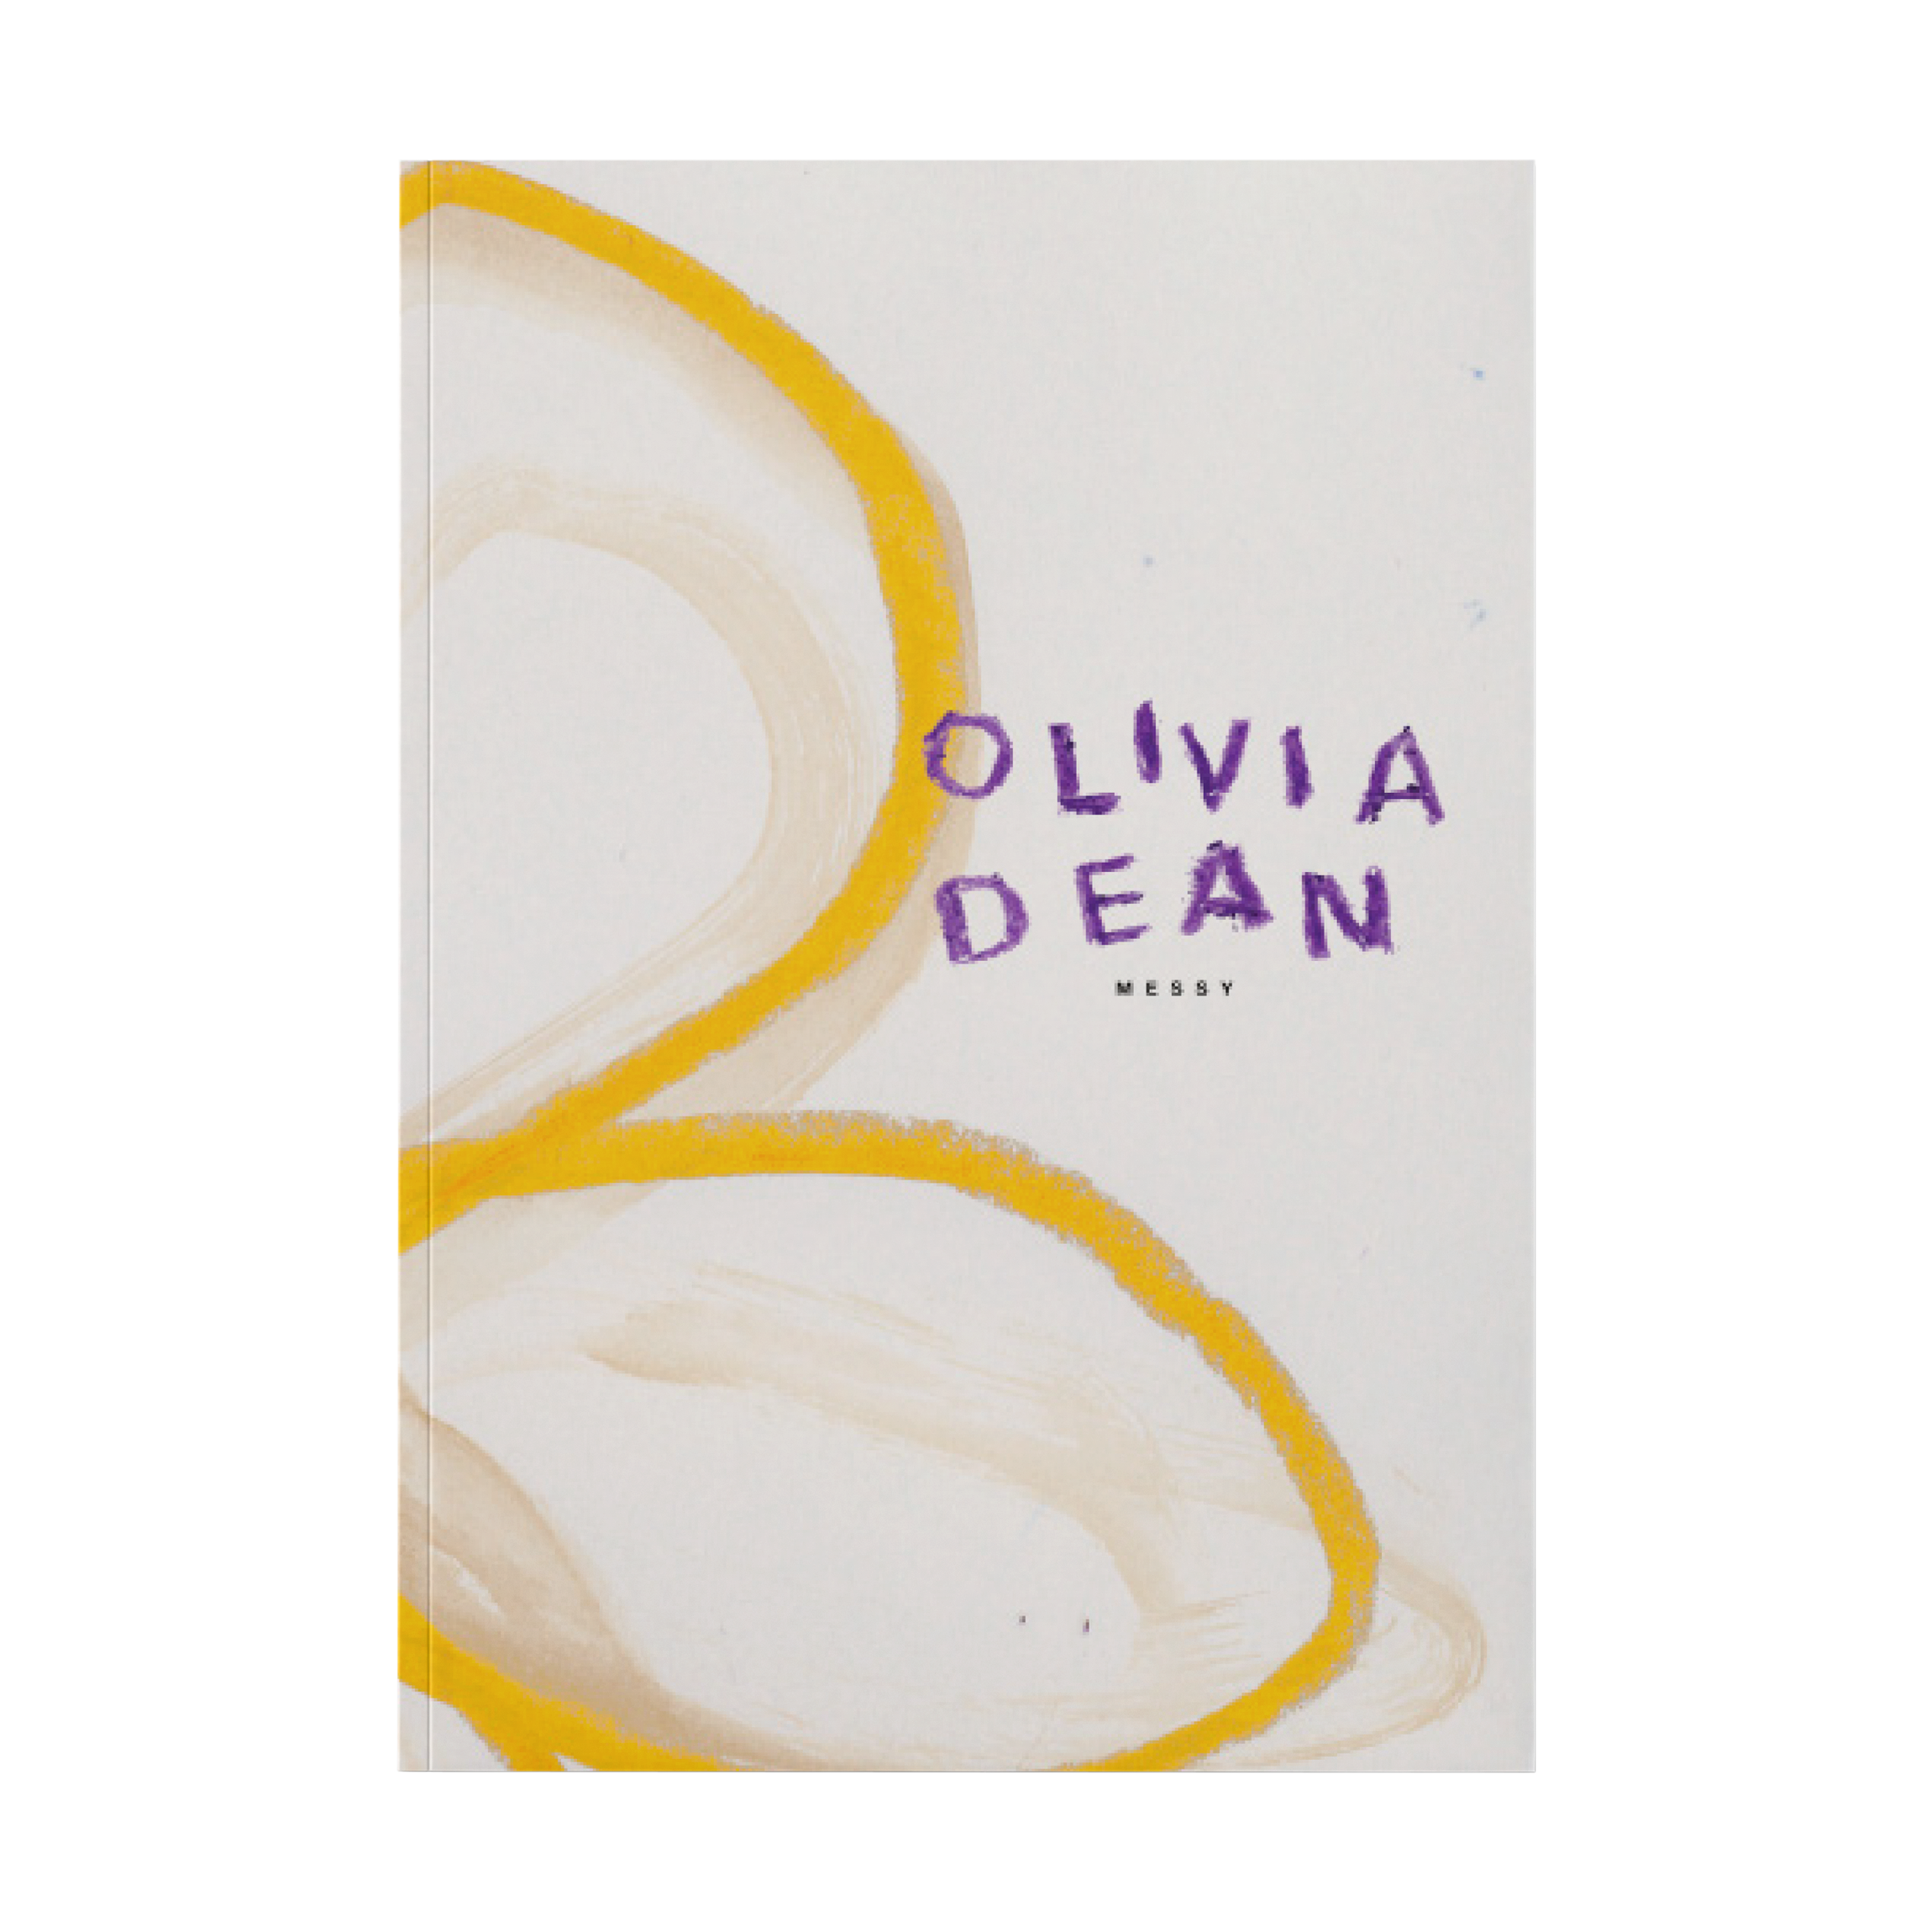 Olivia Dean - Messy - Signed Store Exclusive Vinyl